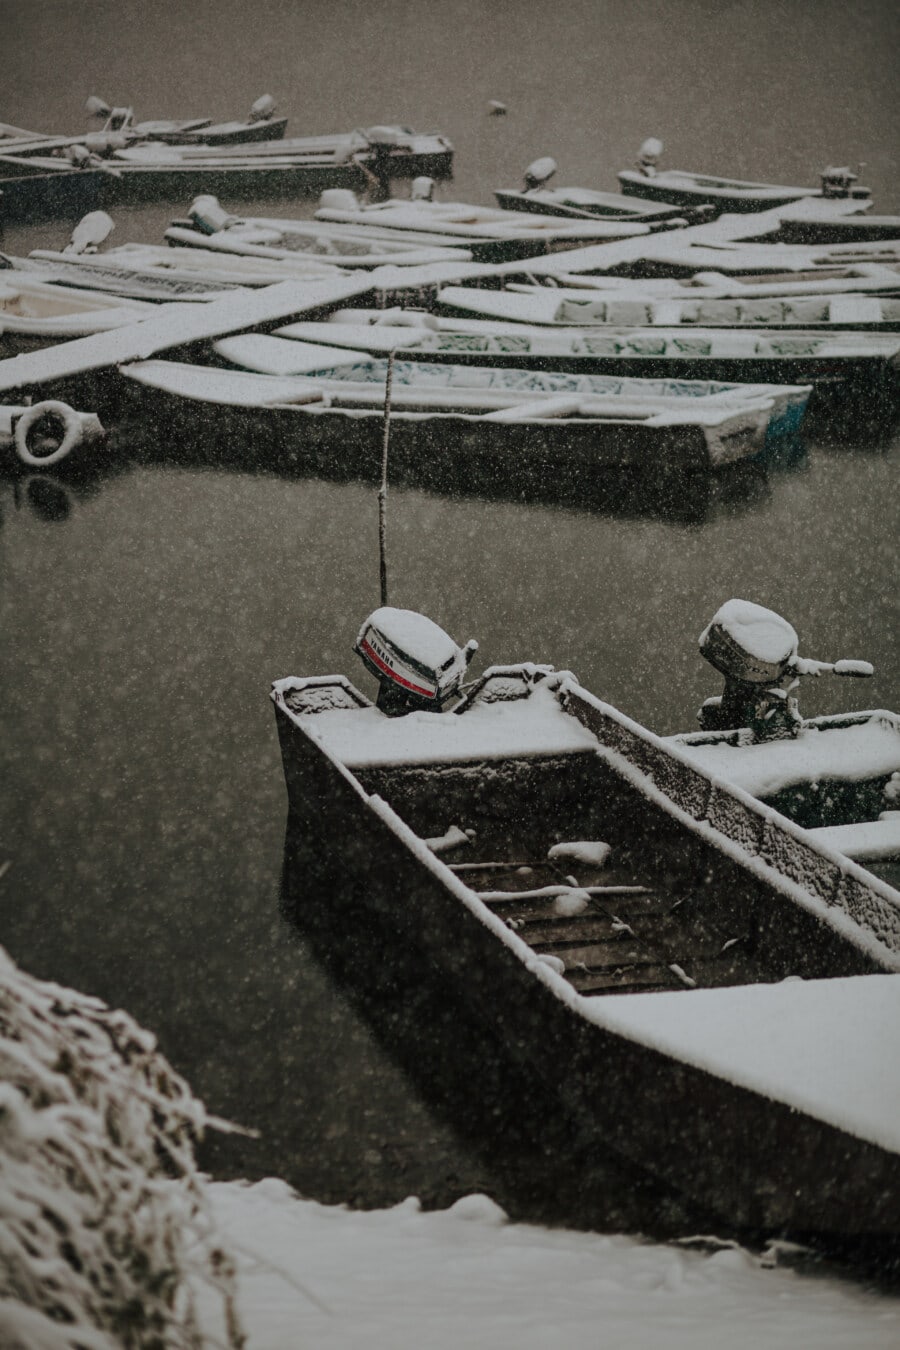 river boat, boats, snowstorm, harbor, winter, snowy, water, vehicle, watercraft, storm